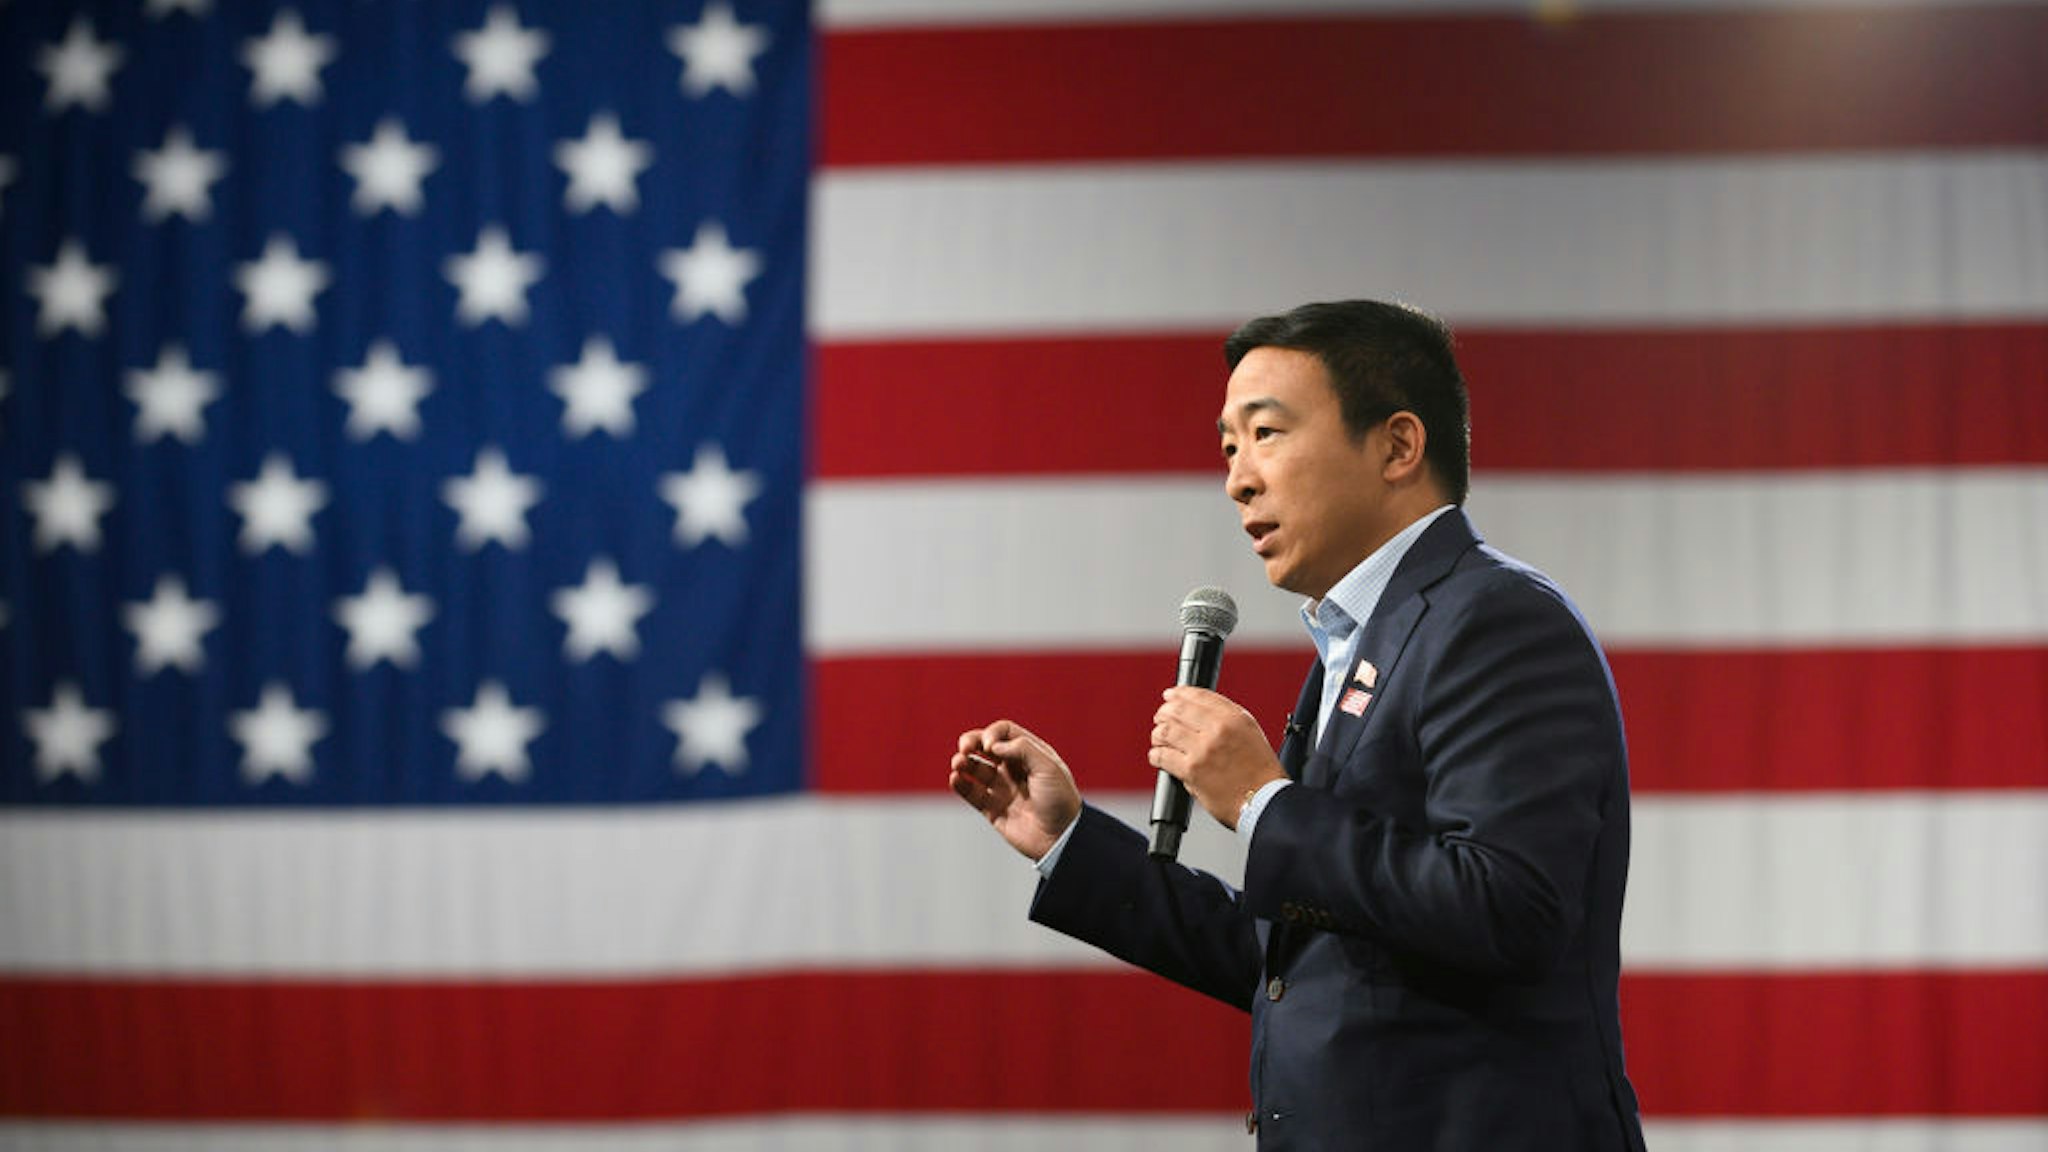 Andrew Yang speaks during a forum on gun safety at the Iowa Events Center